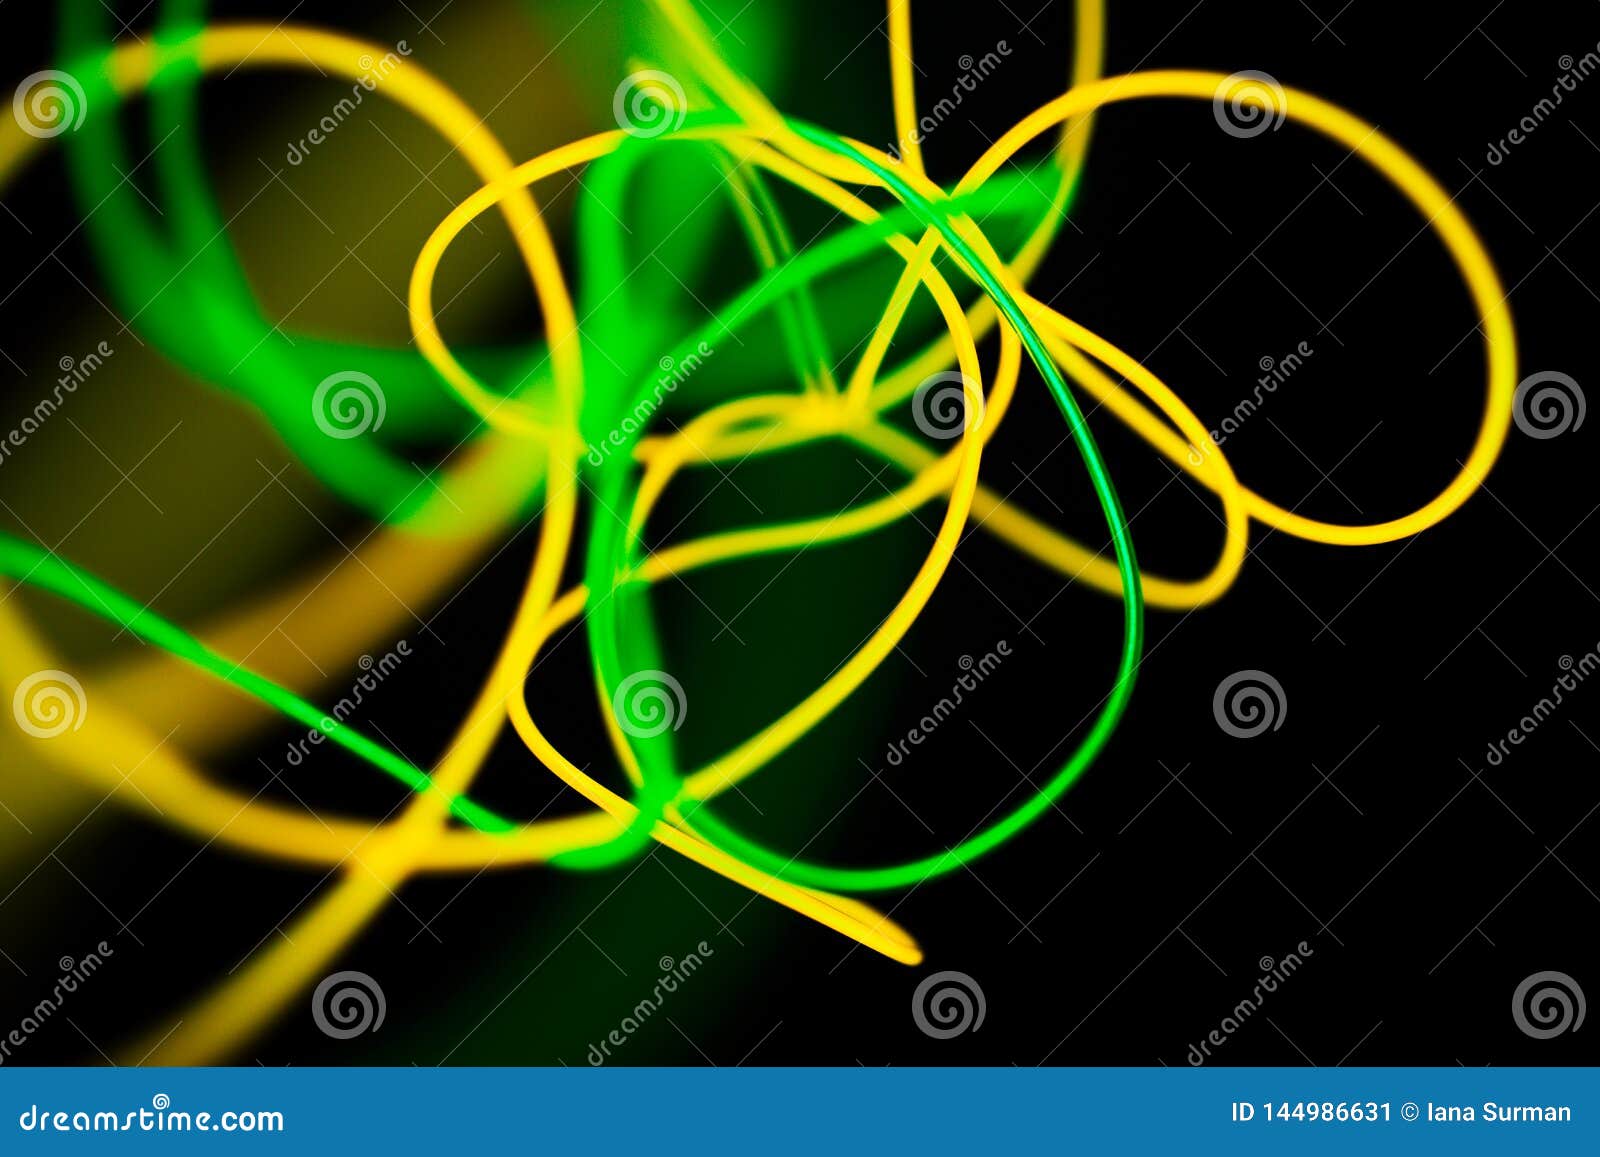 Yellow Neon and Green Neon Abstract. Neon Lines Stock Image - Image of  wallpaper, exposure: 144986631